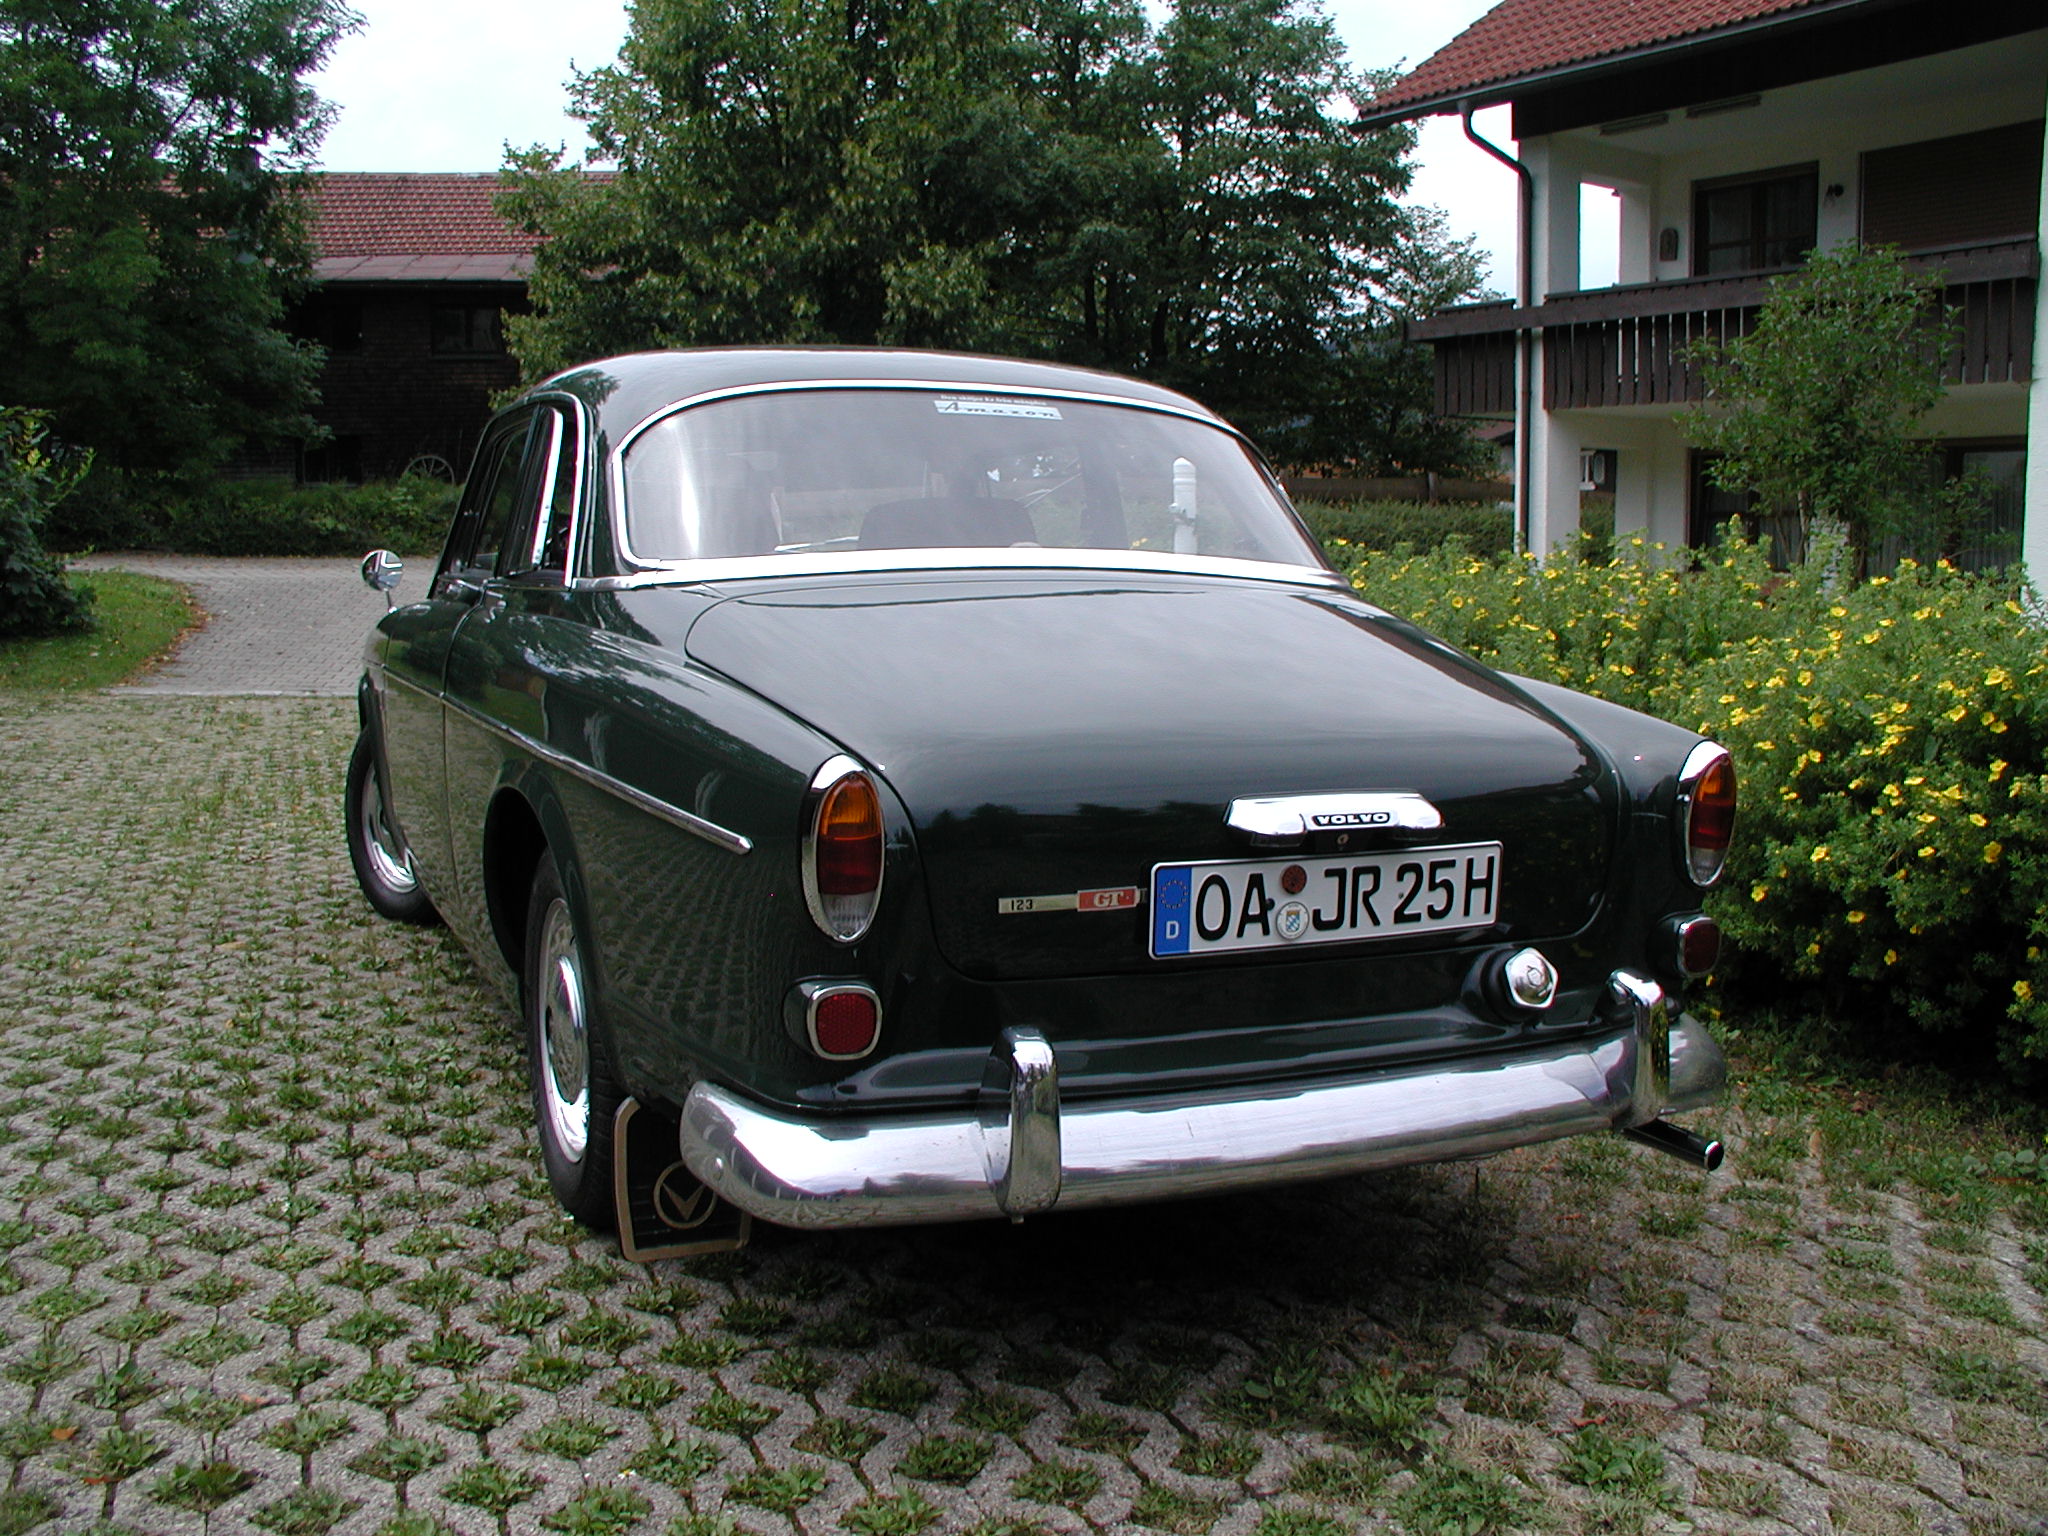 1969 Volvo Amazon 123GT. In 1969 all Volvos all came with the new B-20